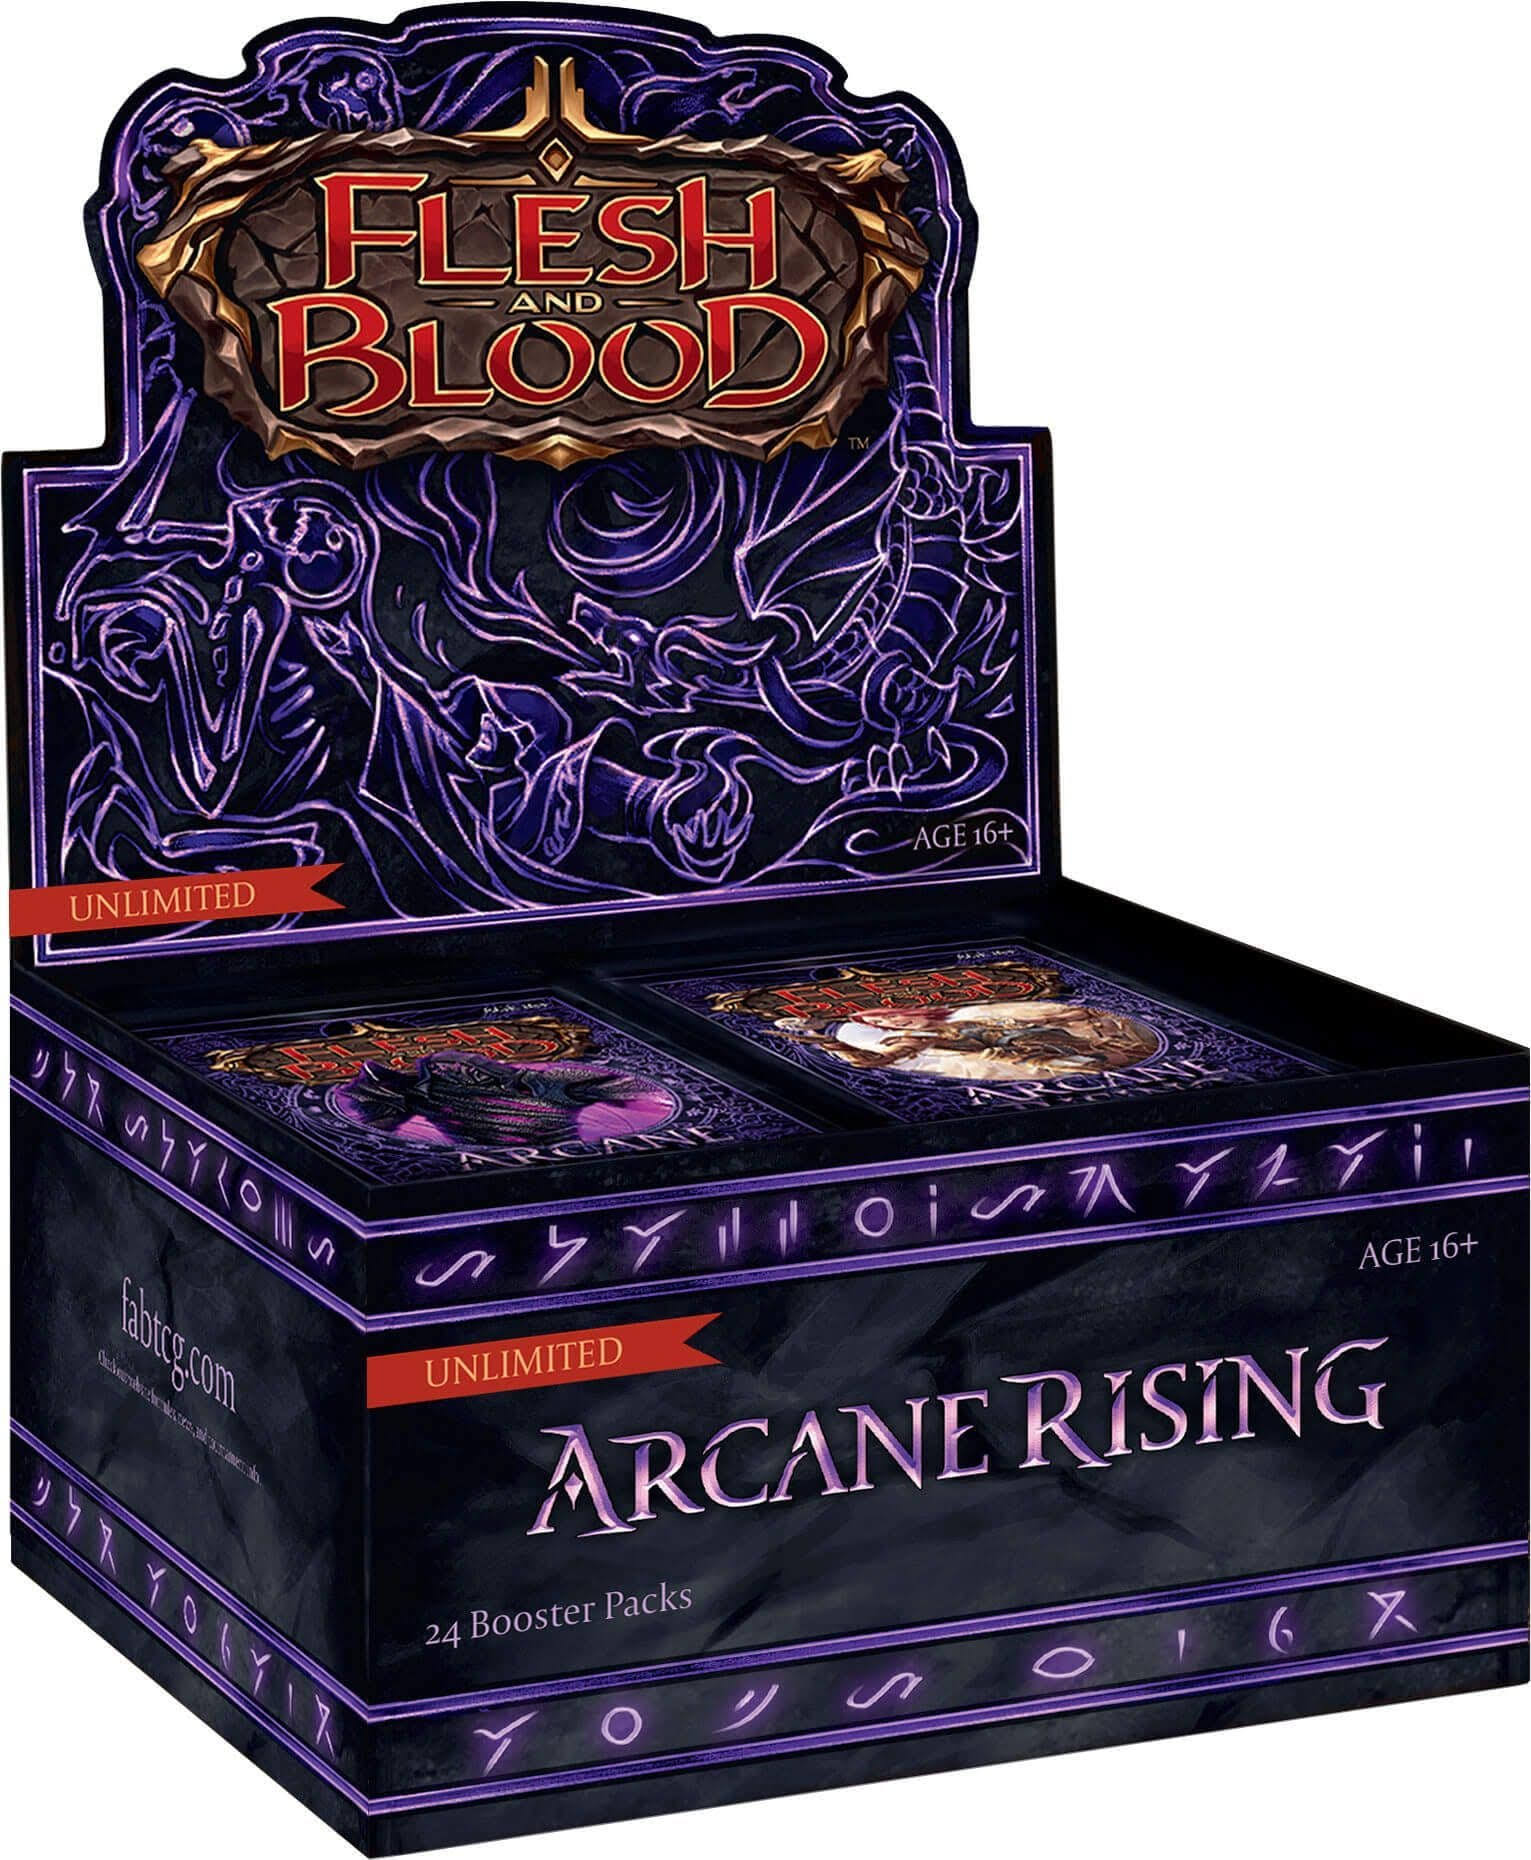 Flesh and Blood - Arcane Rising Unlimited Booster Pack